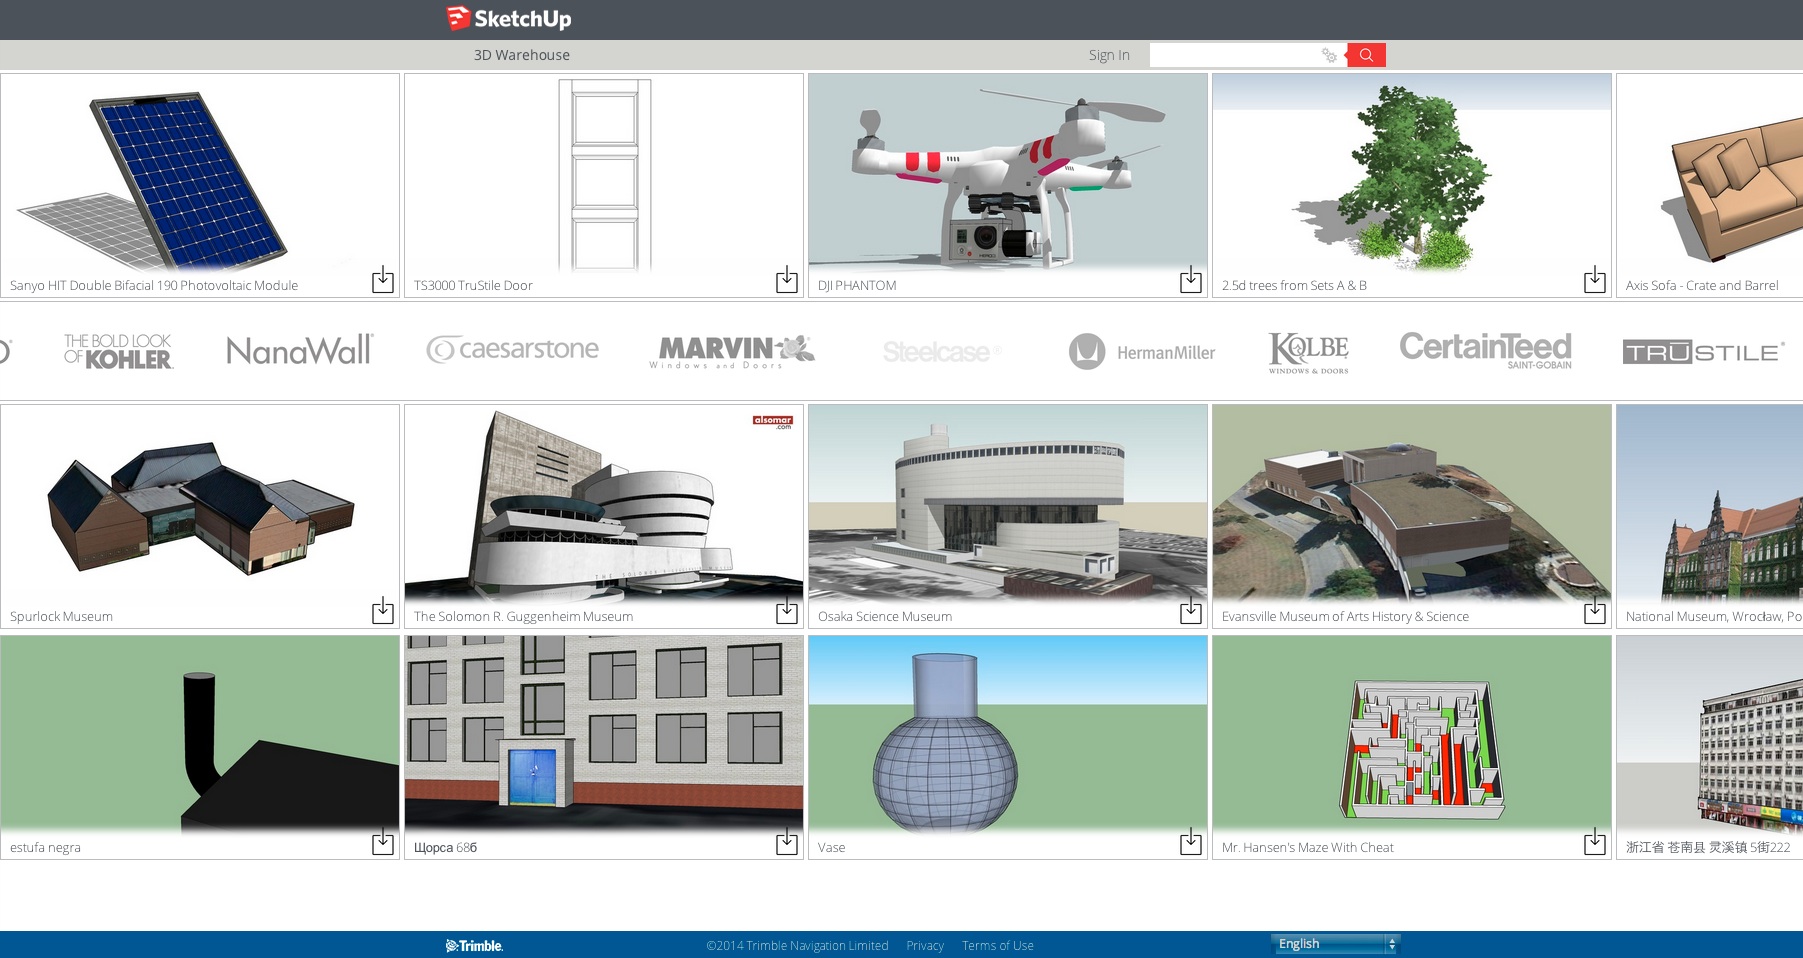 The 3D Warehouse - SketchUp Video Tutorial | LinkedIn Learning, formerly  Lynda.com